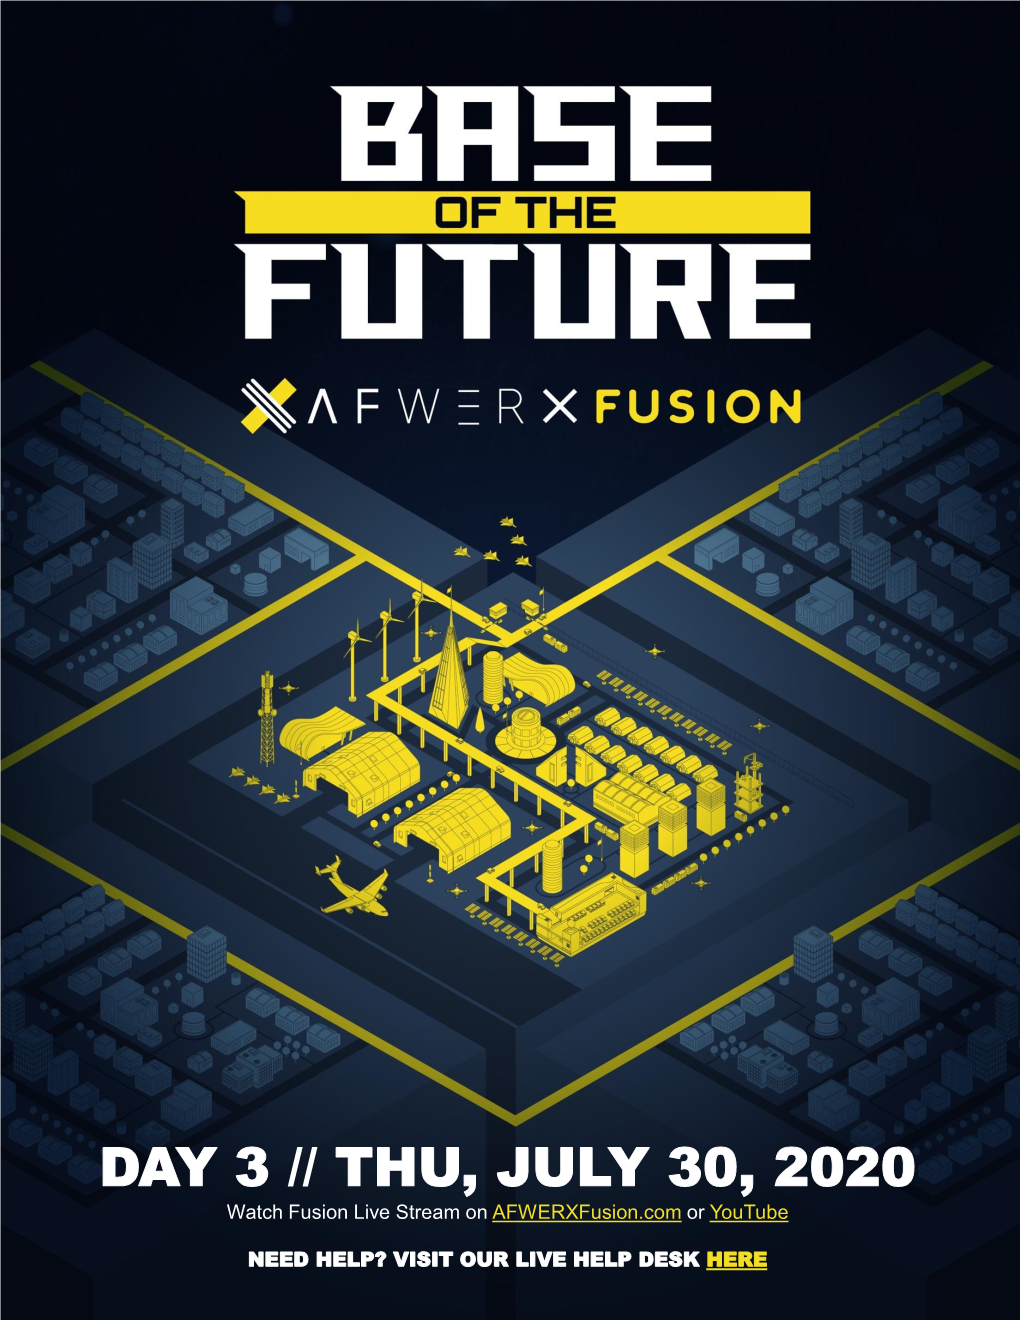 AFWERX Fusion Day 3